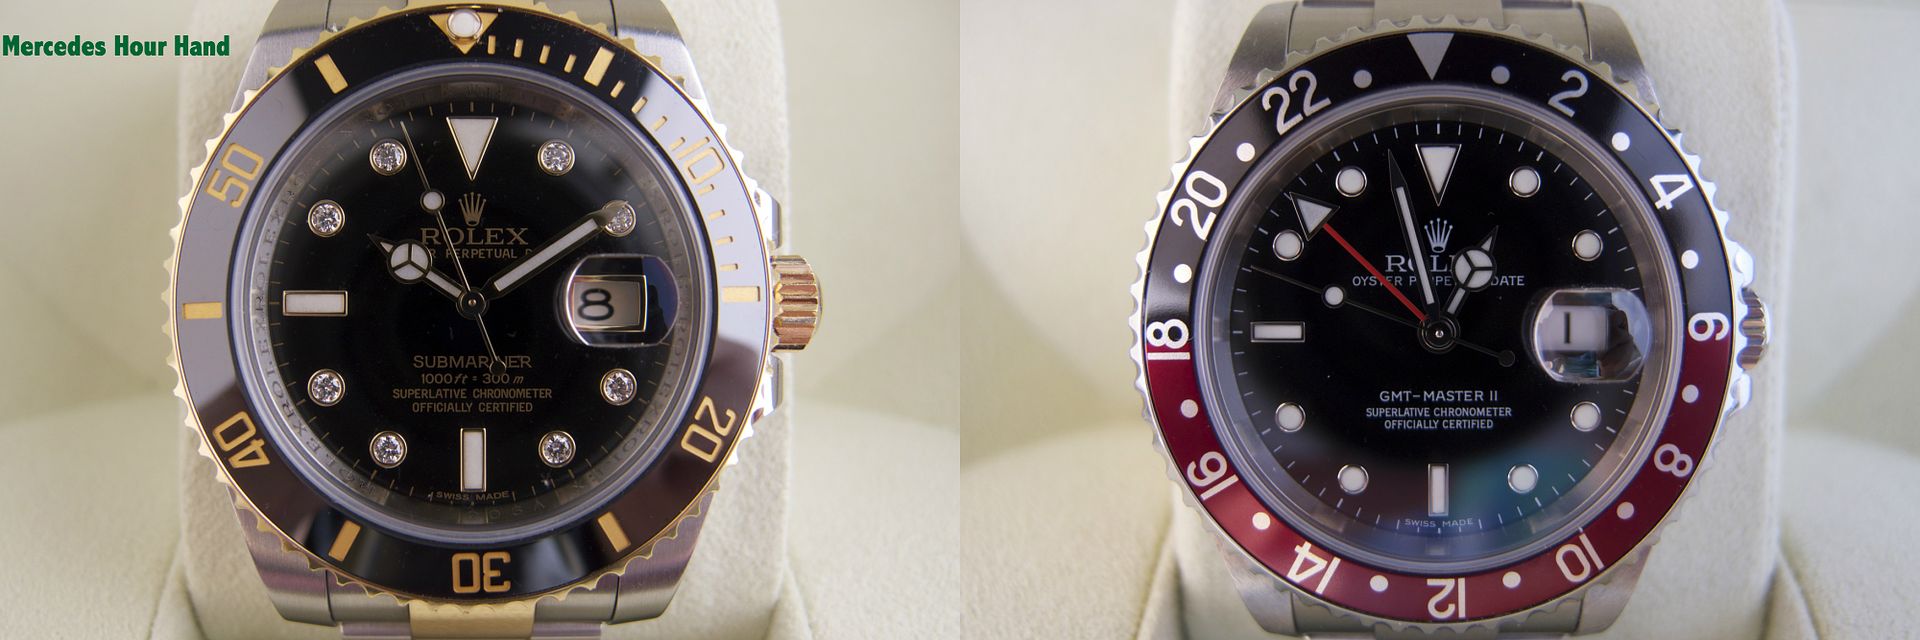  Example of Rolex Mercedes hour hand on Rolex Submariner and Rolex GMT Master II